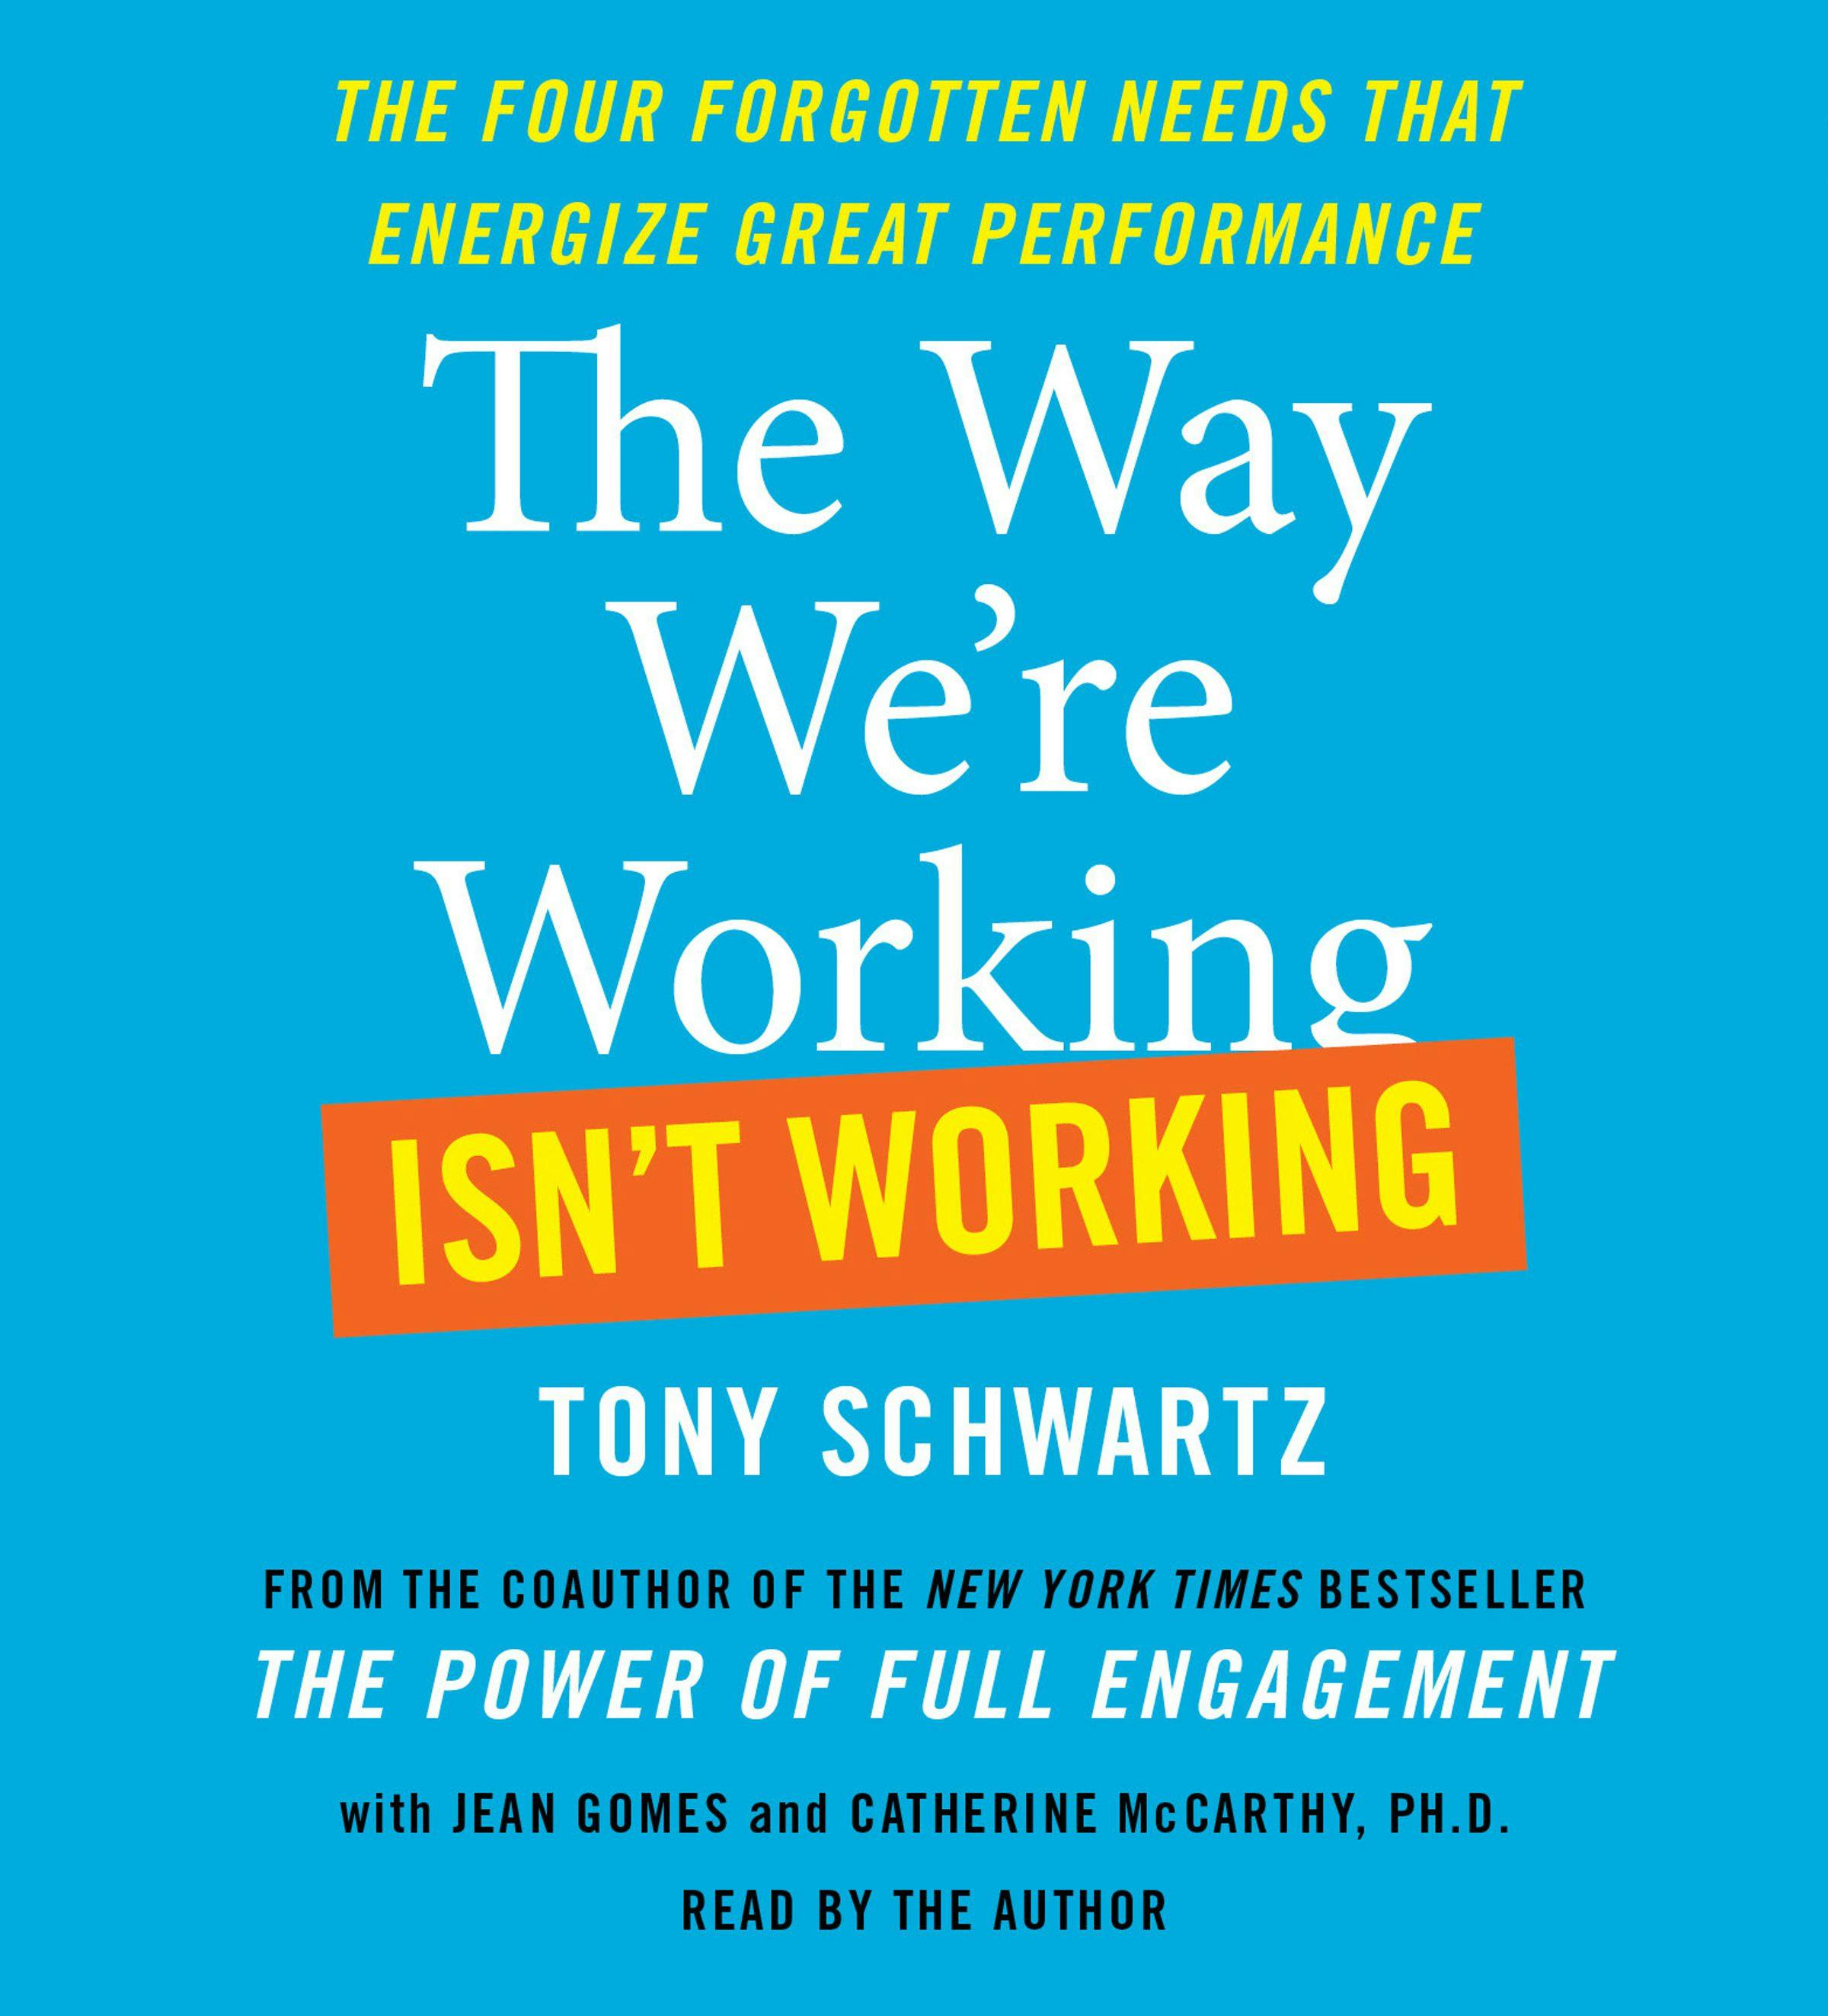 The Way We're Working Isn't Working: The Four Forgotten Needs That Energize Great Performance - Jean Gomes, Tony Schwartz